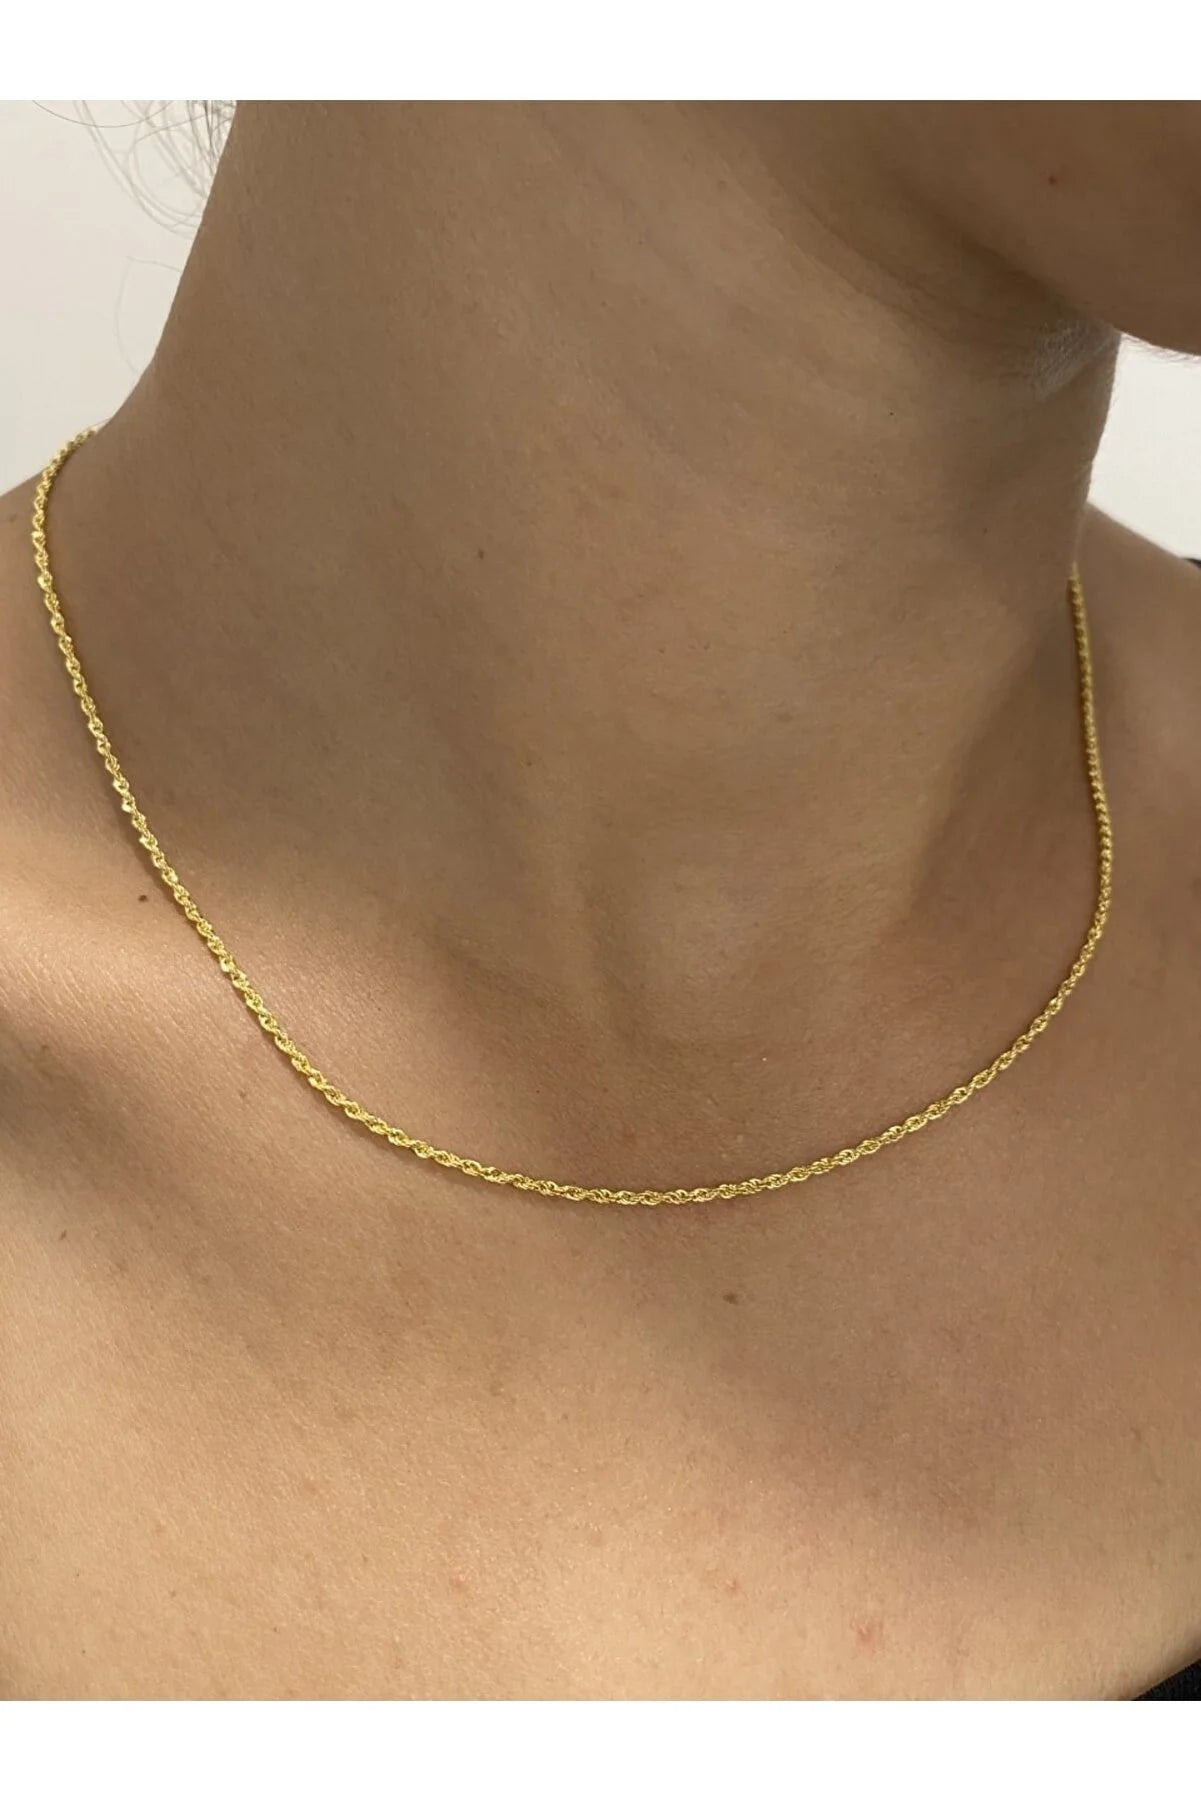 Heda Gold Chain Necklace - heda collection